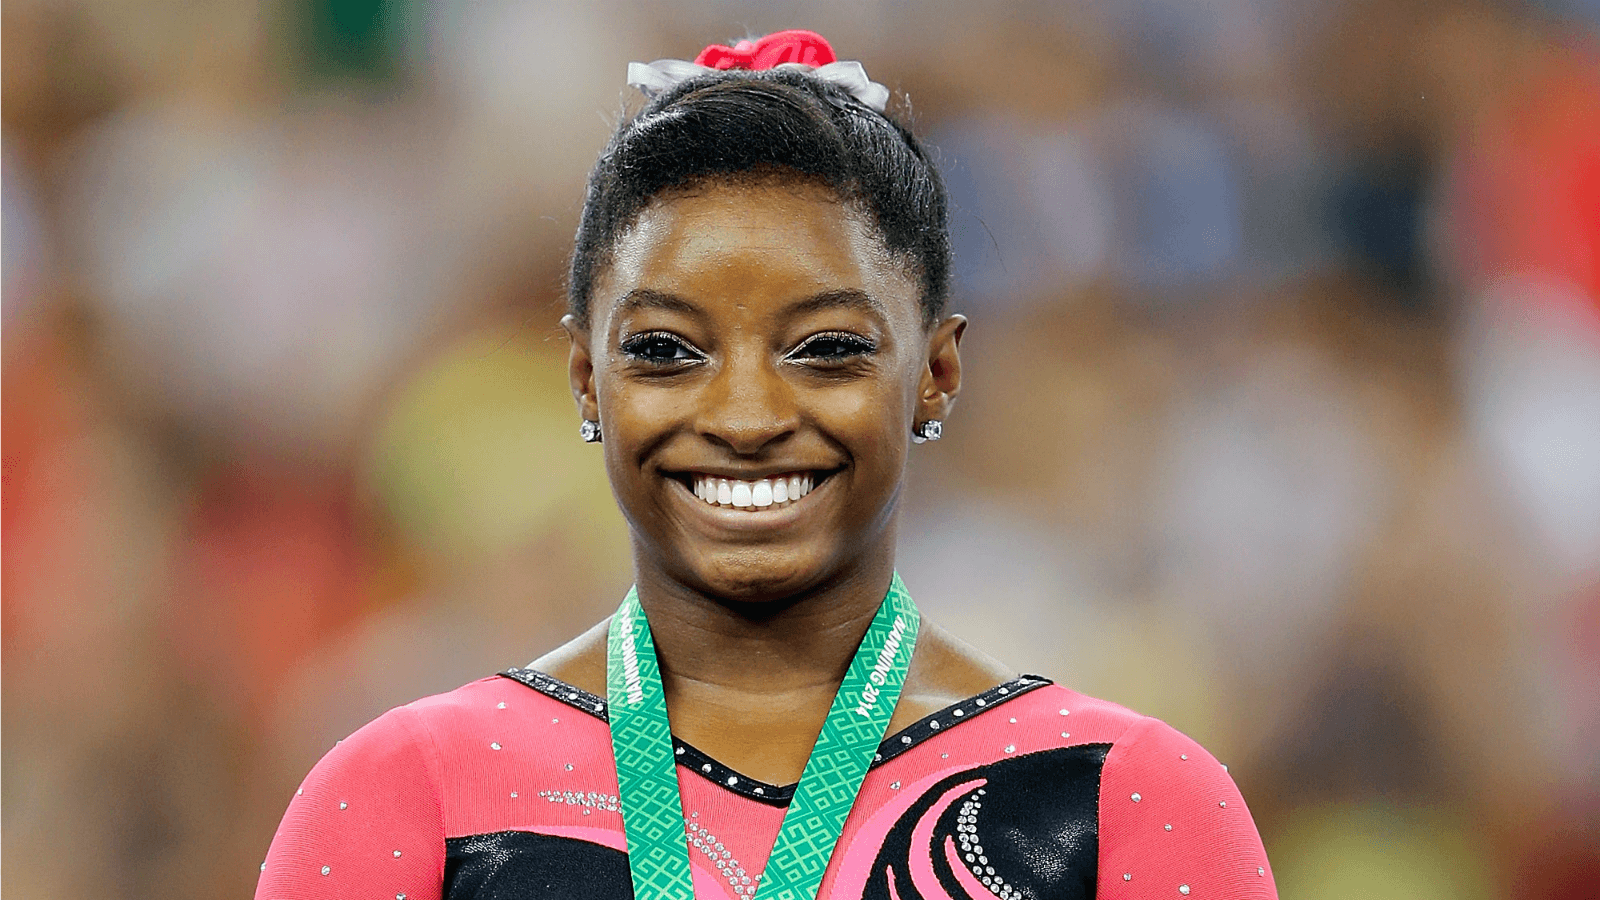 Simone Biles Reveals She Has ADHD After Medical Records Leak